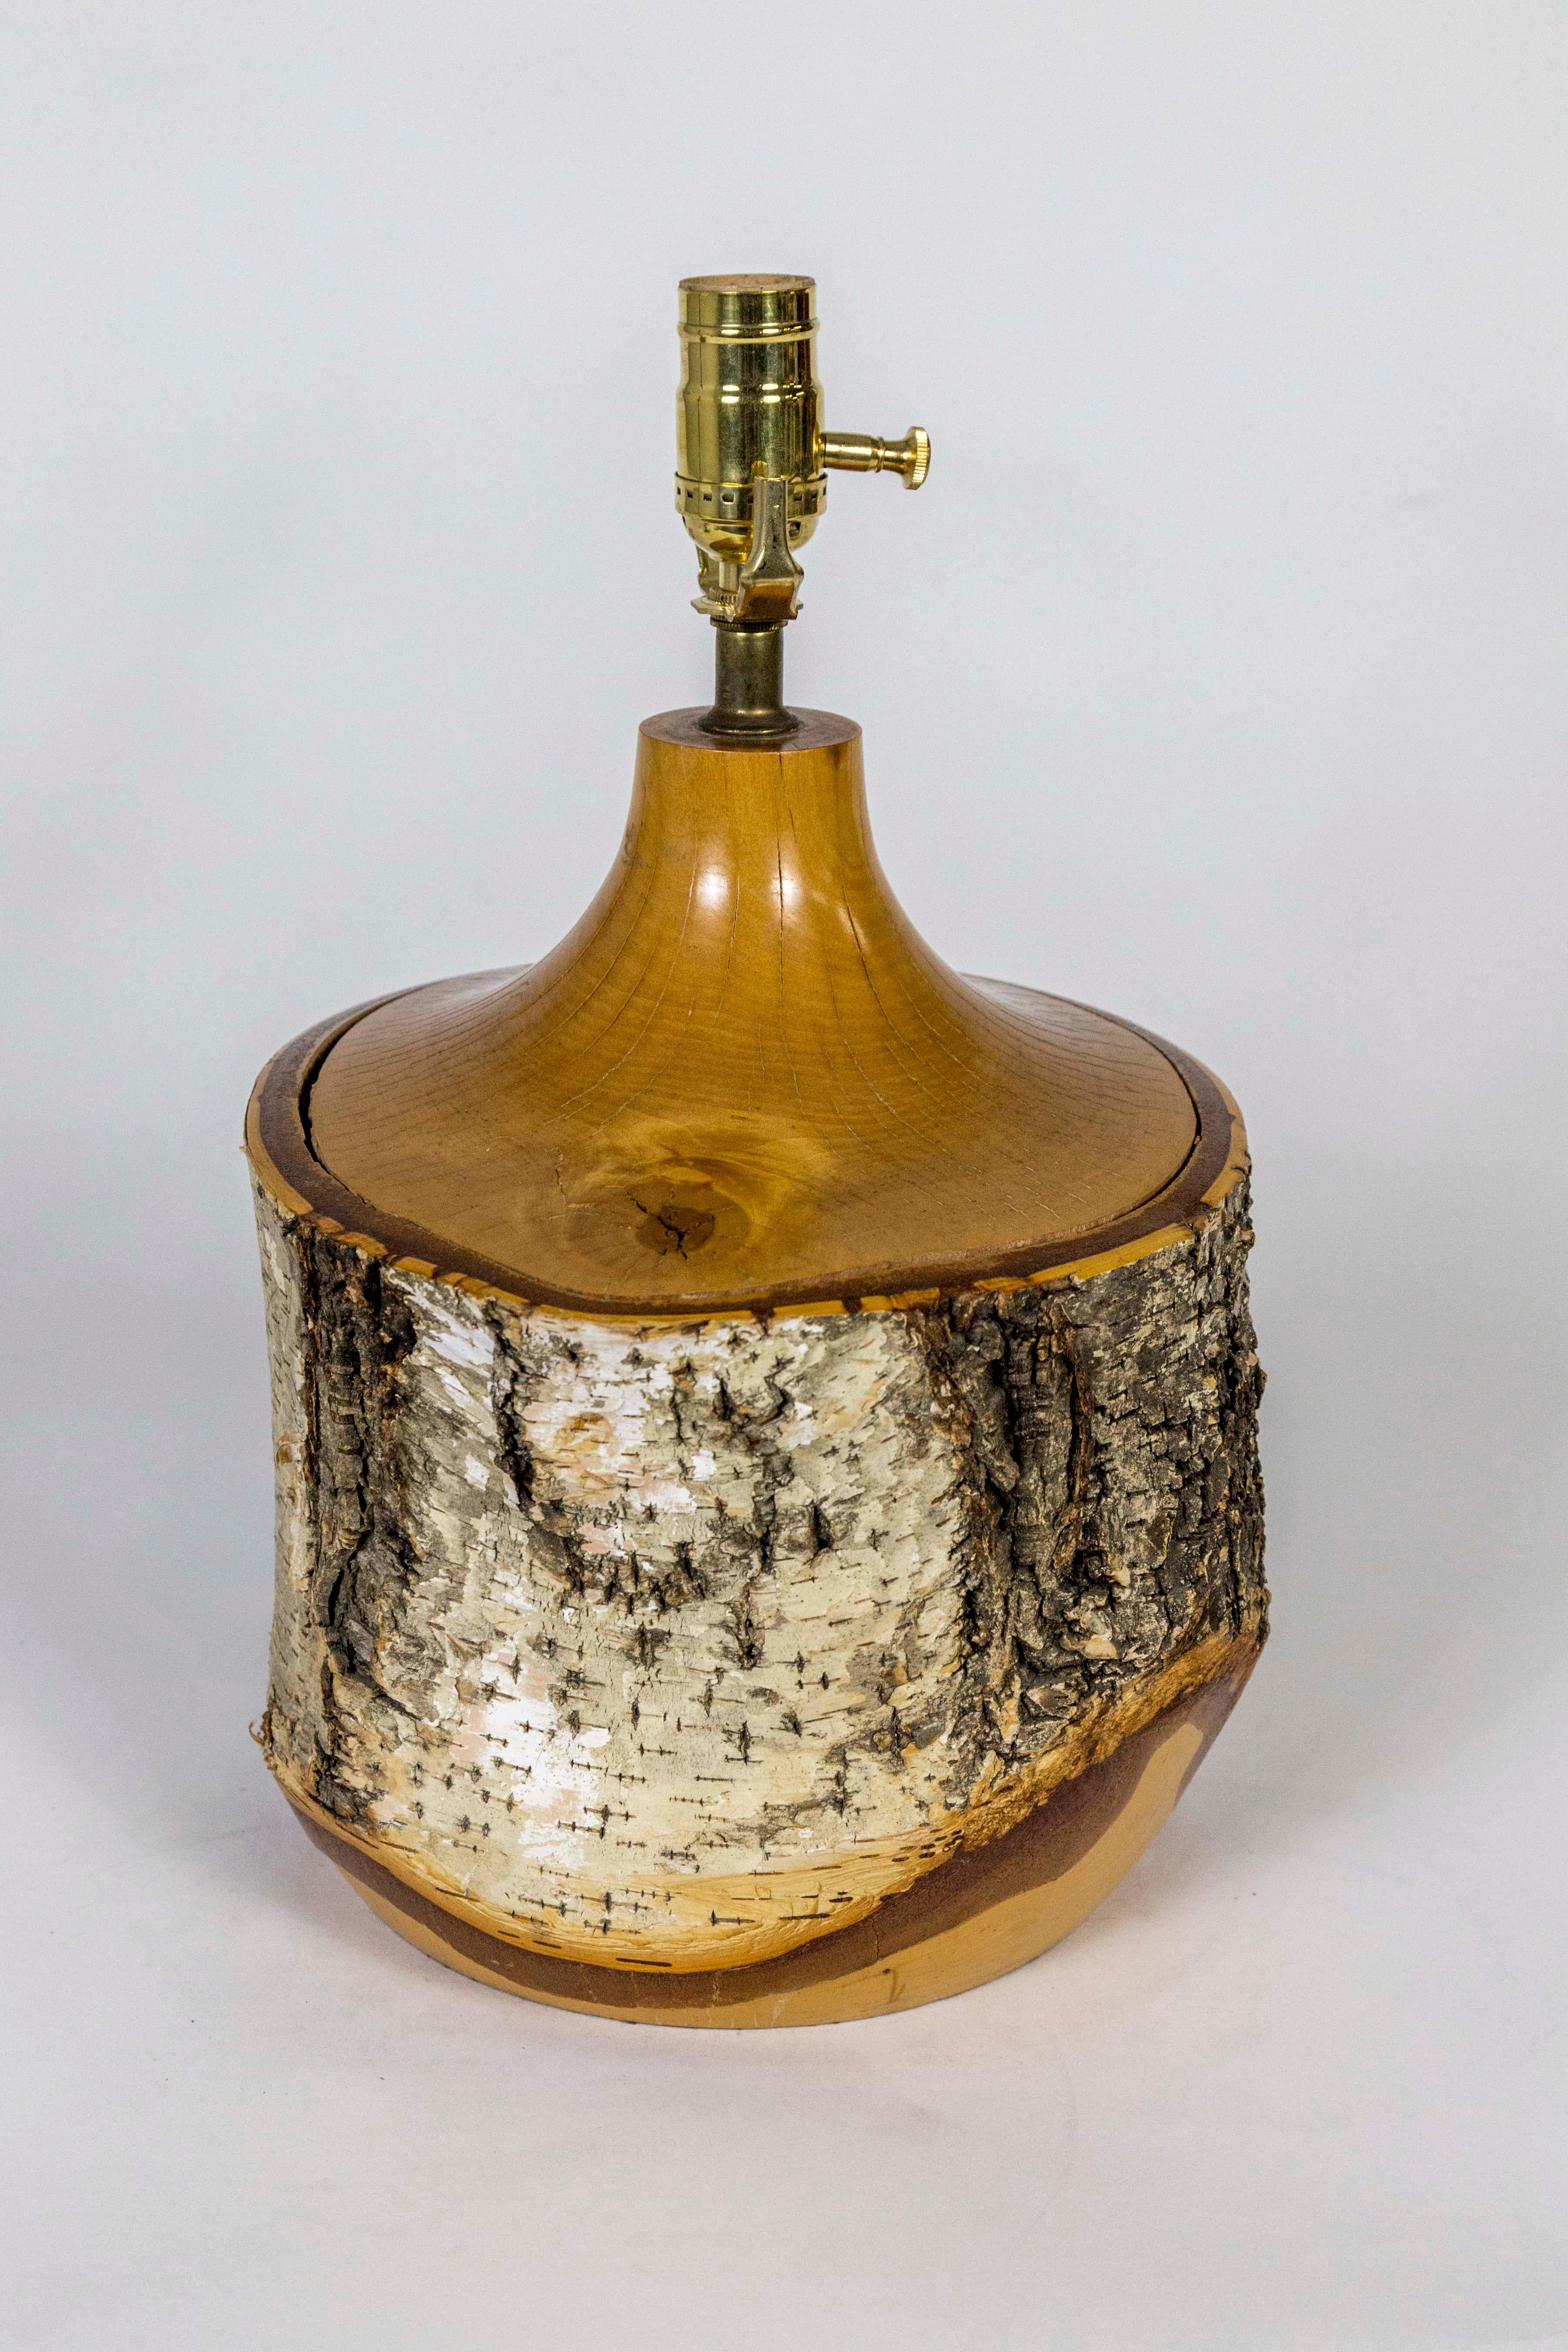 A Mid-Century Modern table lamp made from a Birch tree trunk; with sealed, intact bark. Hand-turned to create a sloping neck and rounded bottom that reveals added dimension and a golden inside color. With a shapely, hand-turned birch finial for the